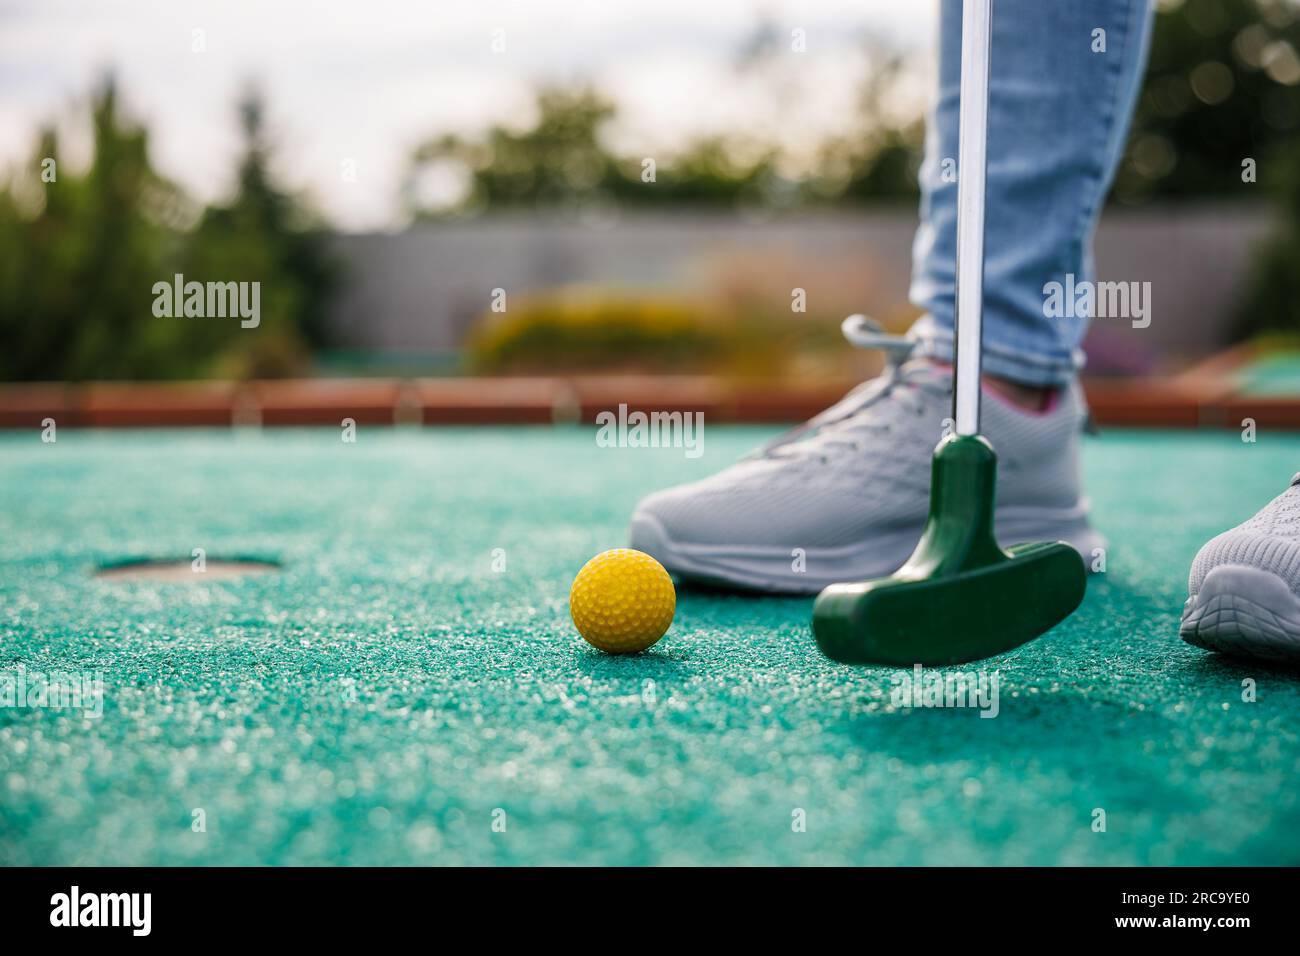 Golfer playing miniature golf and trying putting ball into hole. Leisure activity during summer Stock Photo